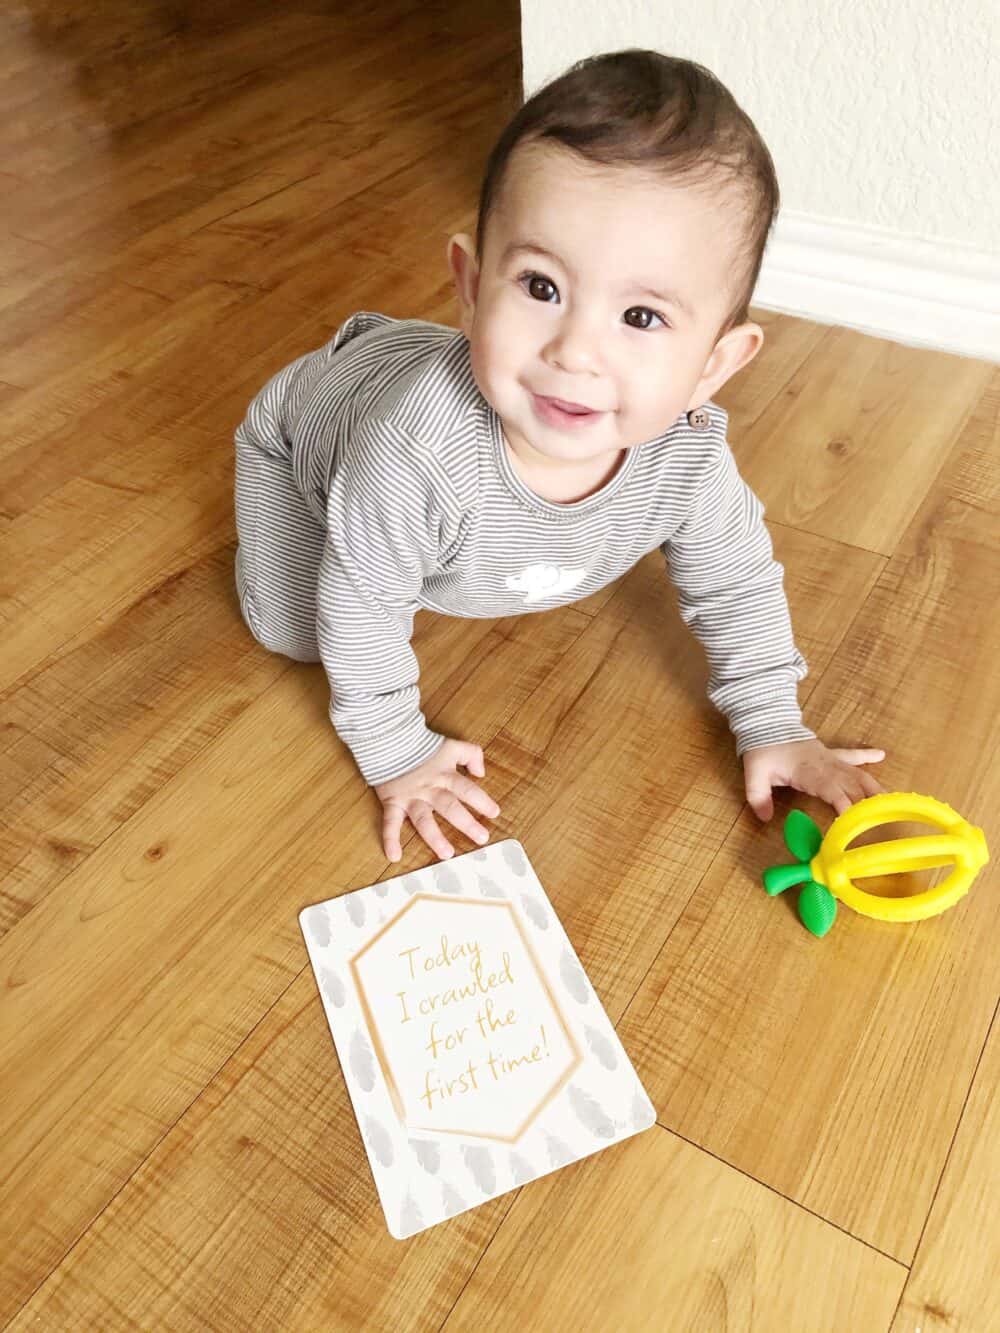 A baby is playing with a toy on the floor.